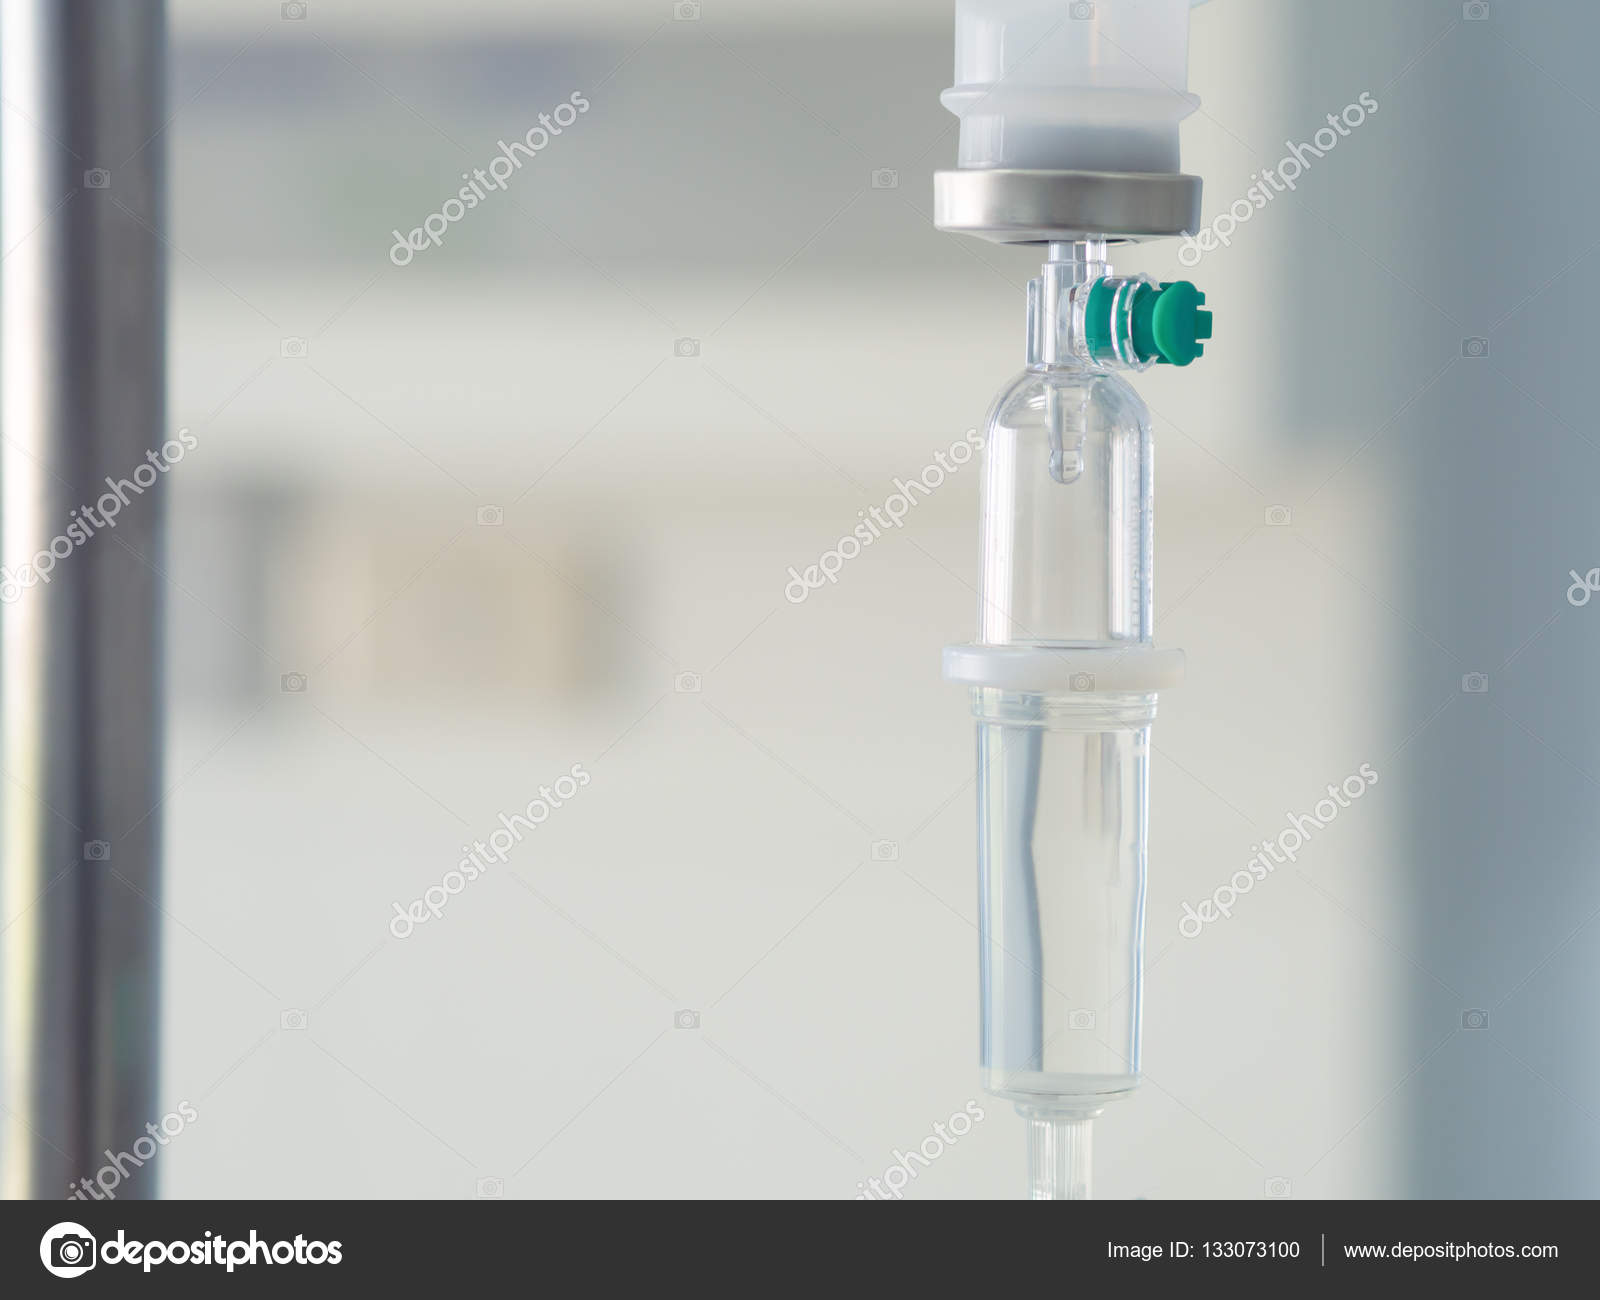 Saline intravenous (iv) drip in hospital. Health care and Medical ...